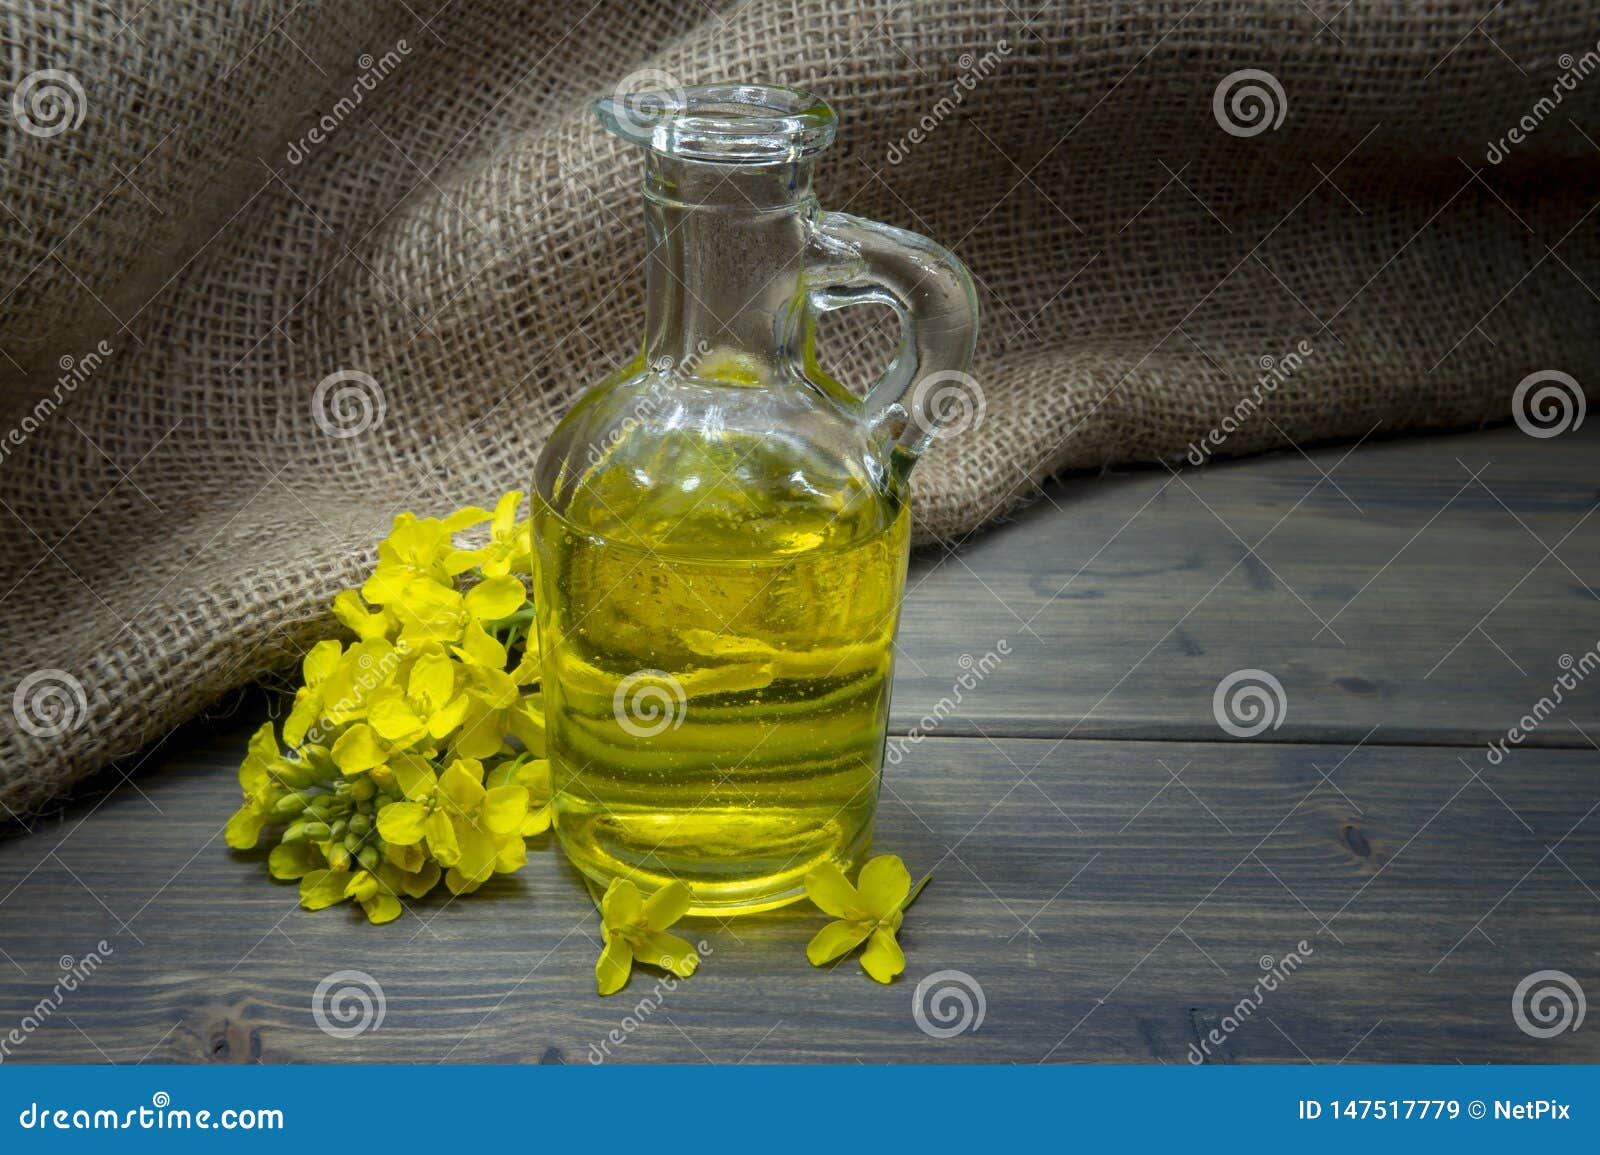 yellow canola or rapeseed flowers with oil